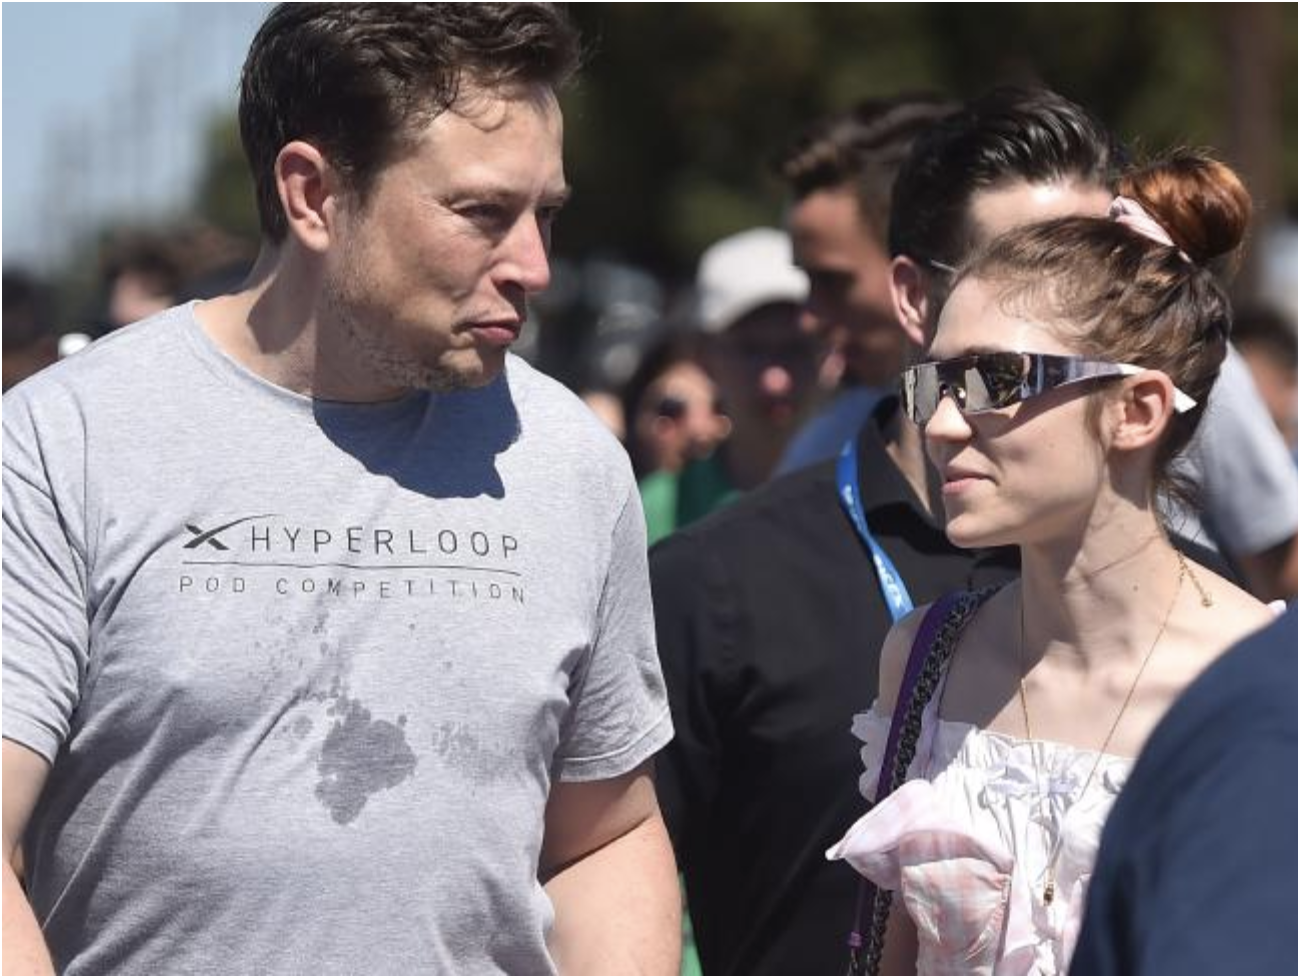 Musk with Grimes at the 2018 Space X Hyperloop Pod Competition, in Hawthorne, California on July 22, 2018. Picture: AFP/Robyn BeckSource:AFP